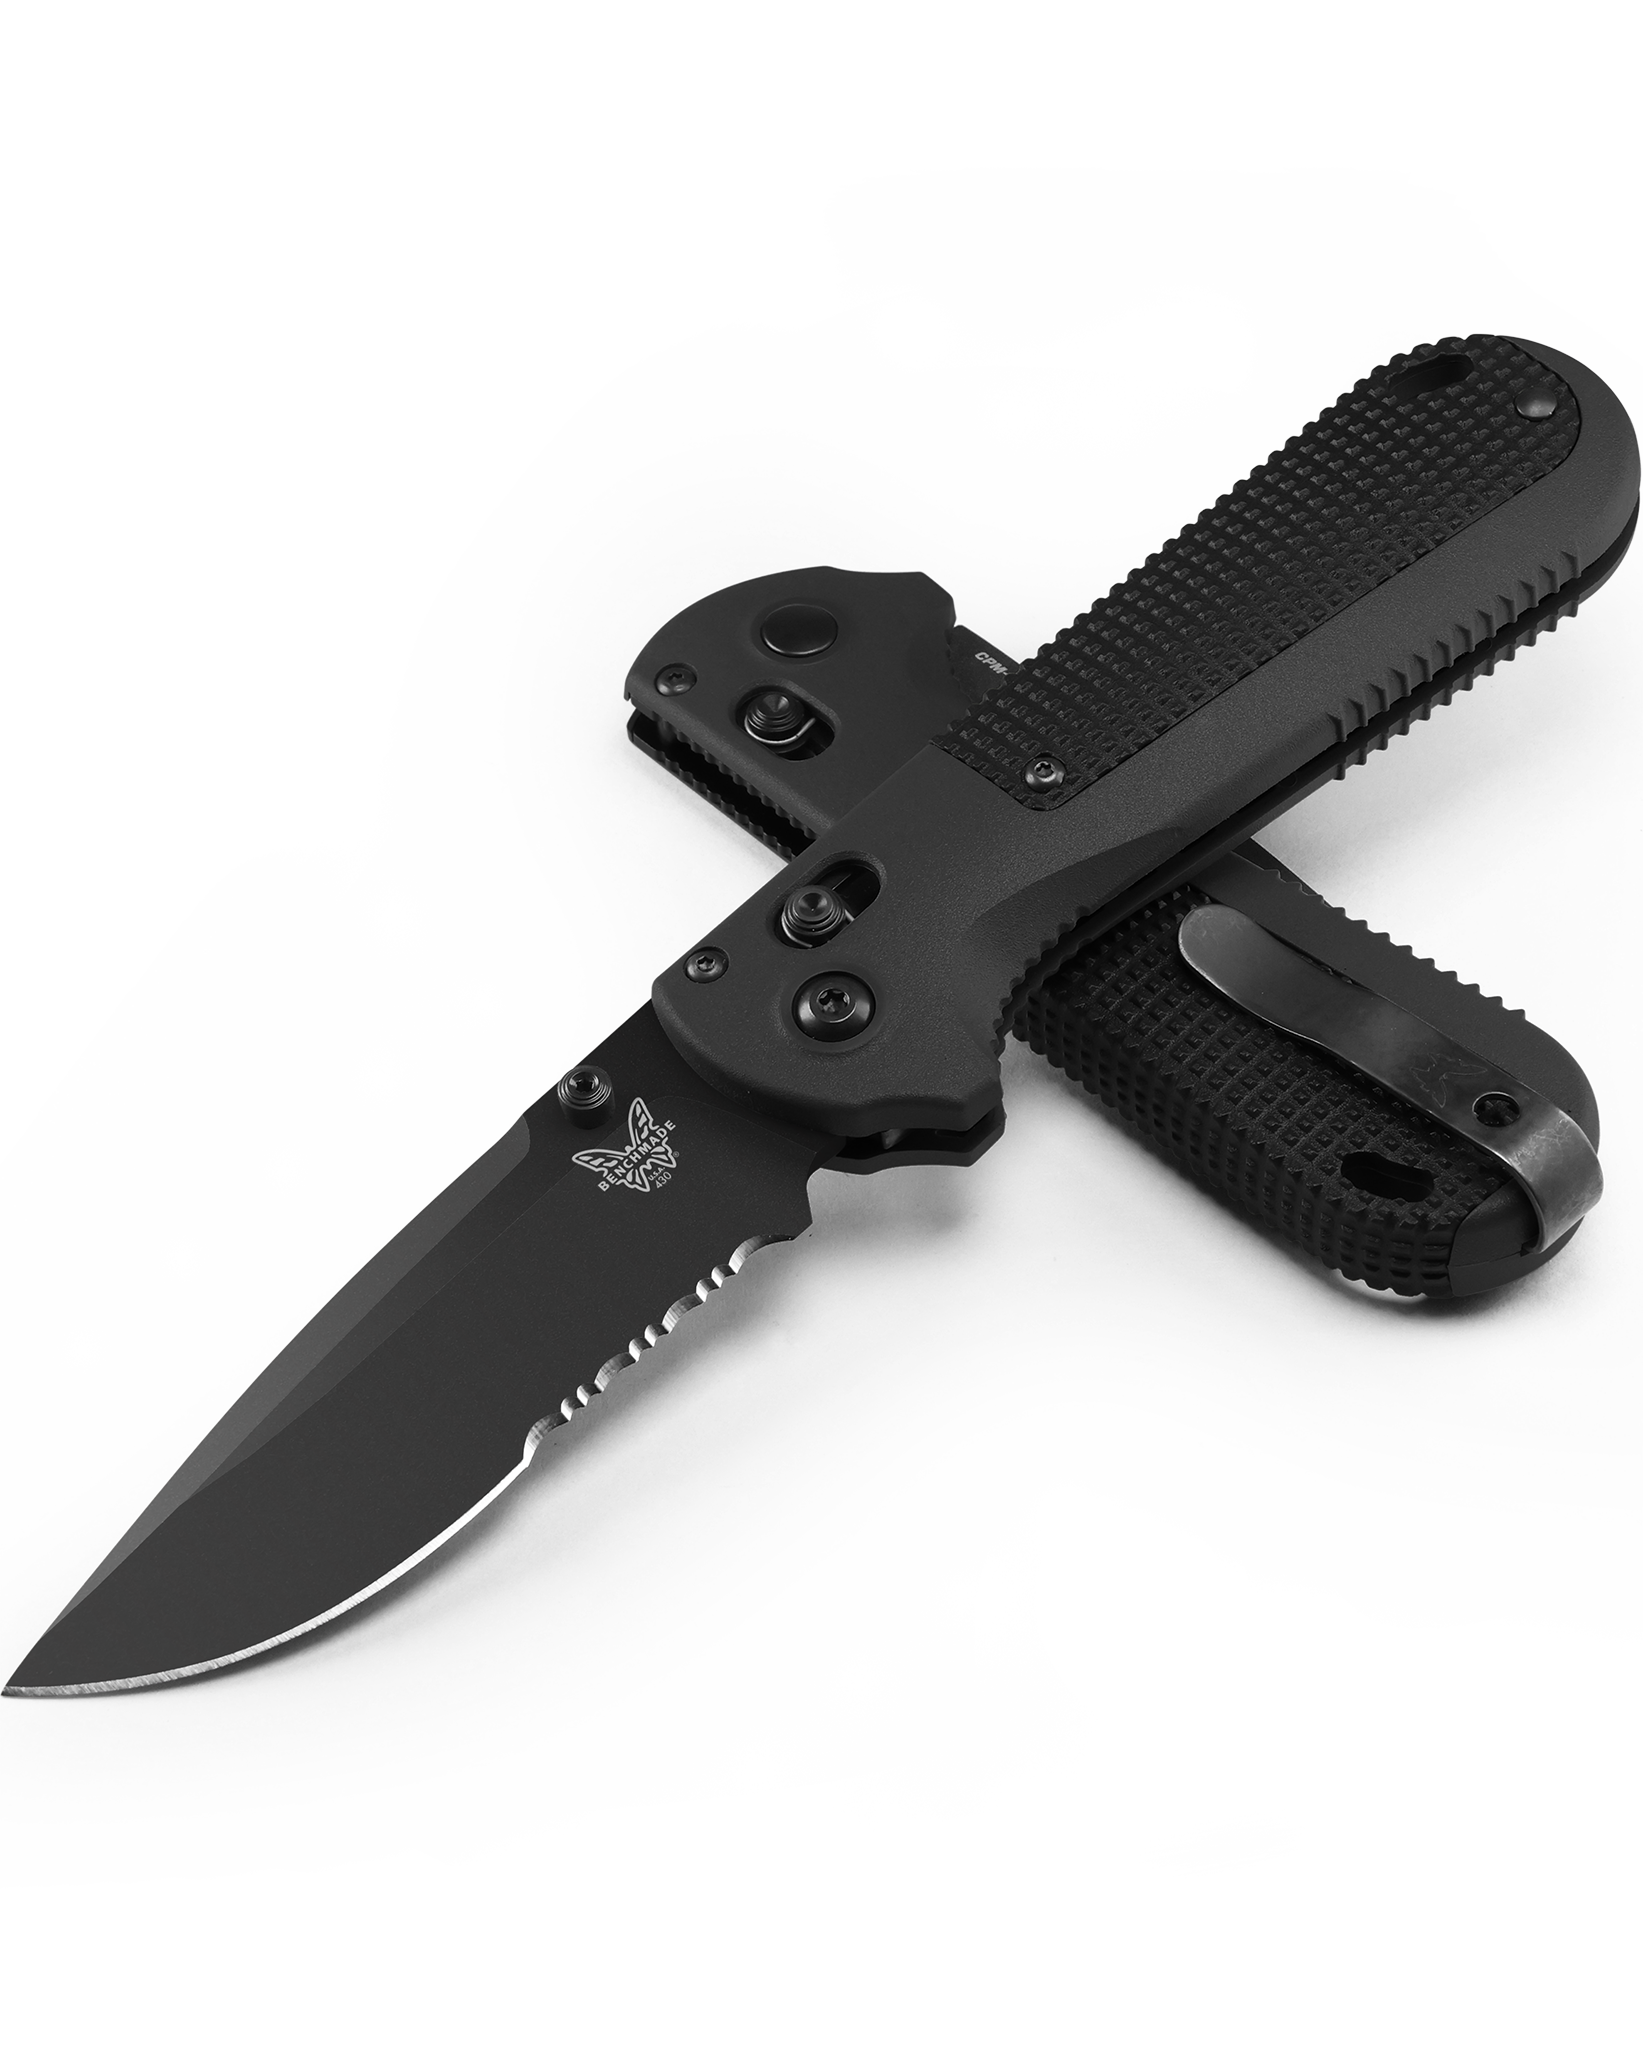 Benchmade Redoubt - AXIS Lock - CPM-D2 - Grivory Handle - 430SBK-02